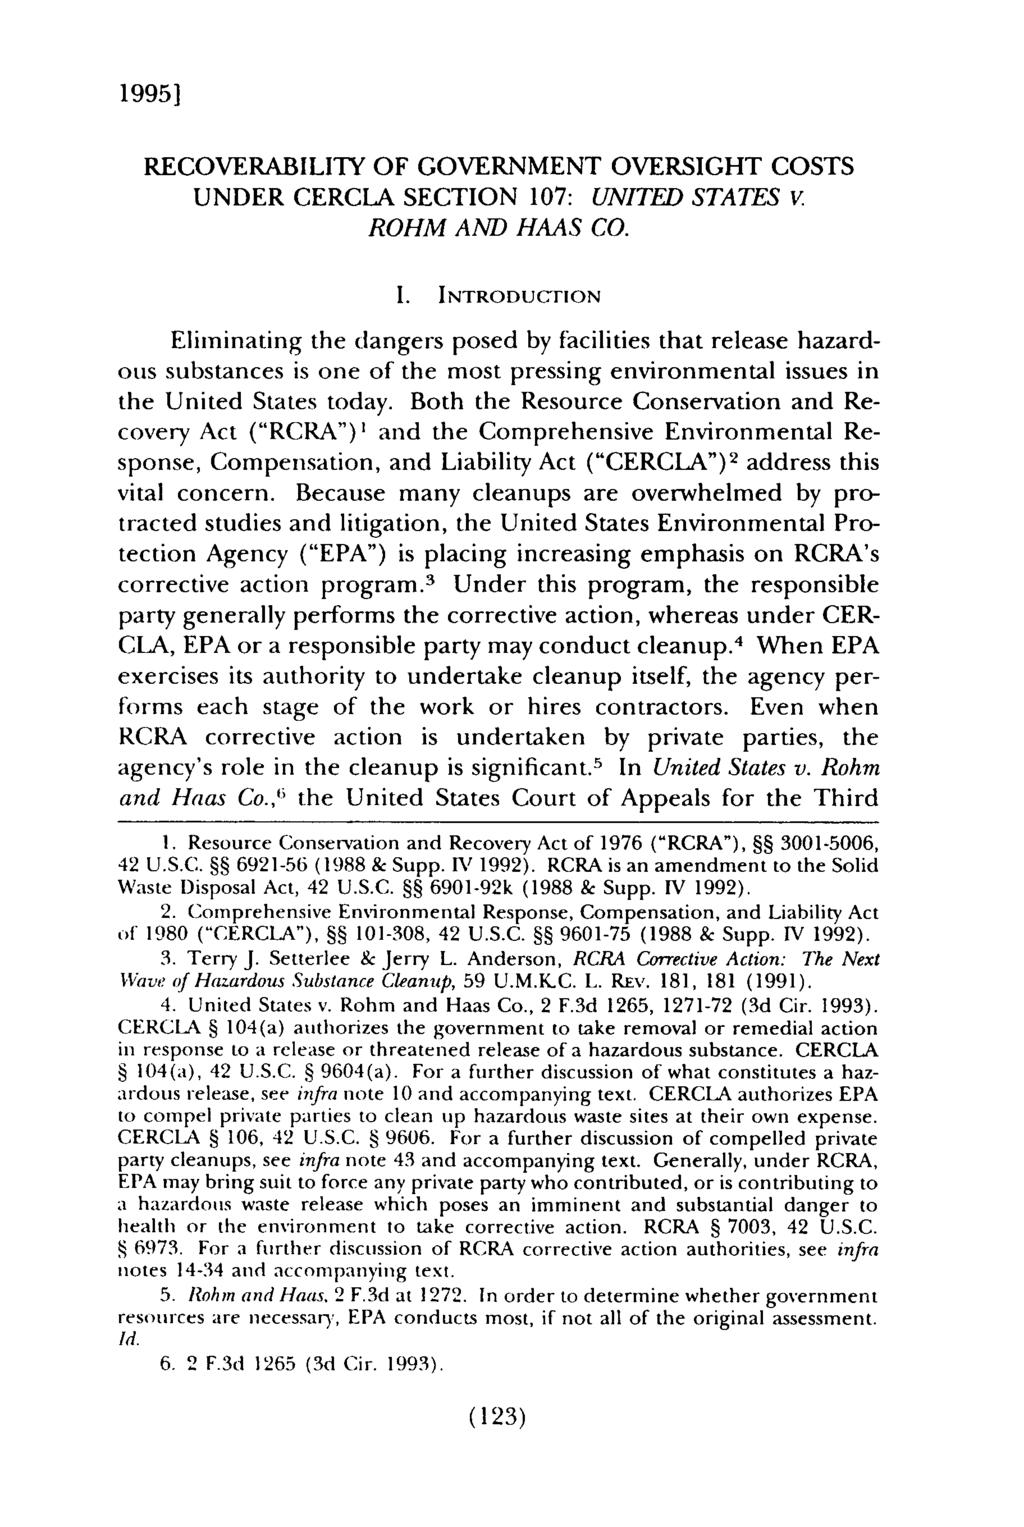 19951 Aberbach: Recoverability of Government Oversight Costs under CERCLA Section RECOVERABILITY OF GOVERNMENT OVERSIGHT COSTS UNDER CERCLA SECTION 107: UNITED STATES v. ROHM AND HAAS CO. I.